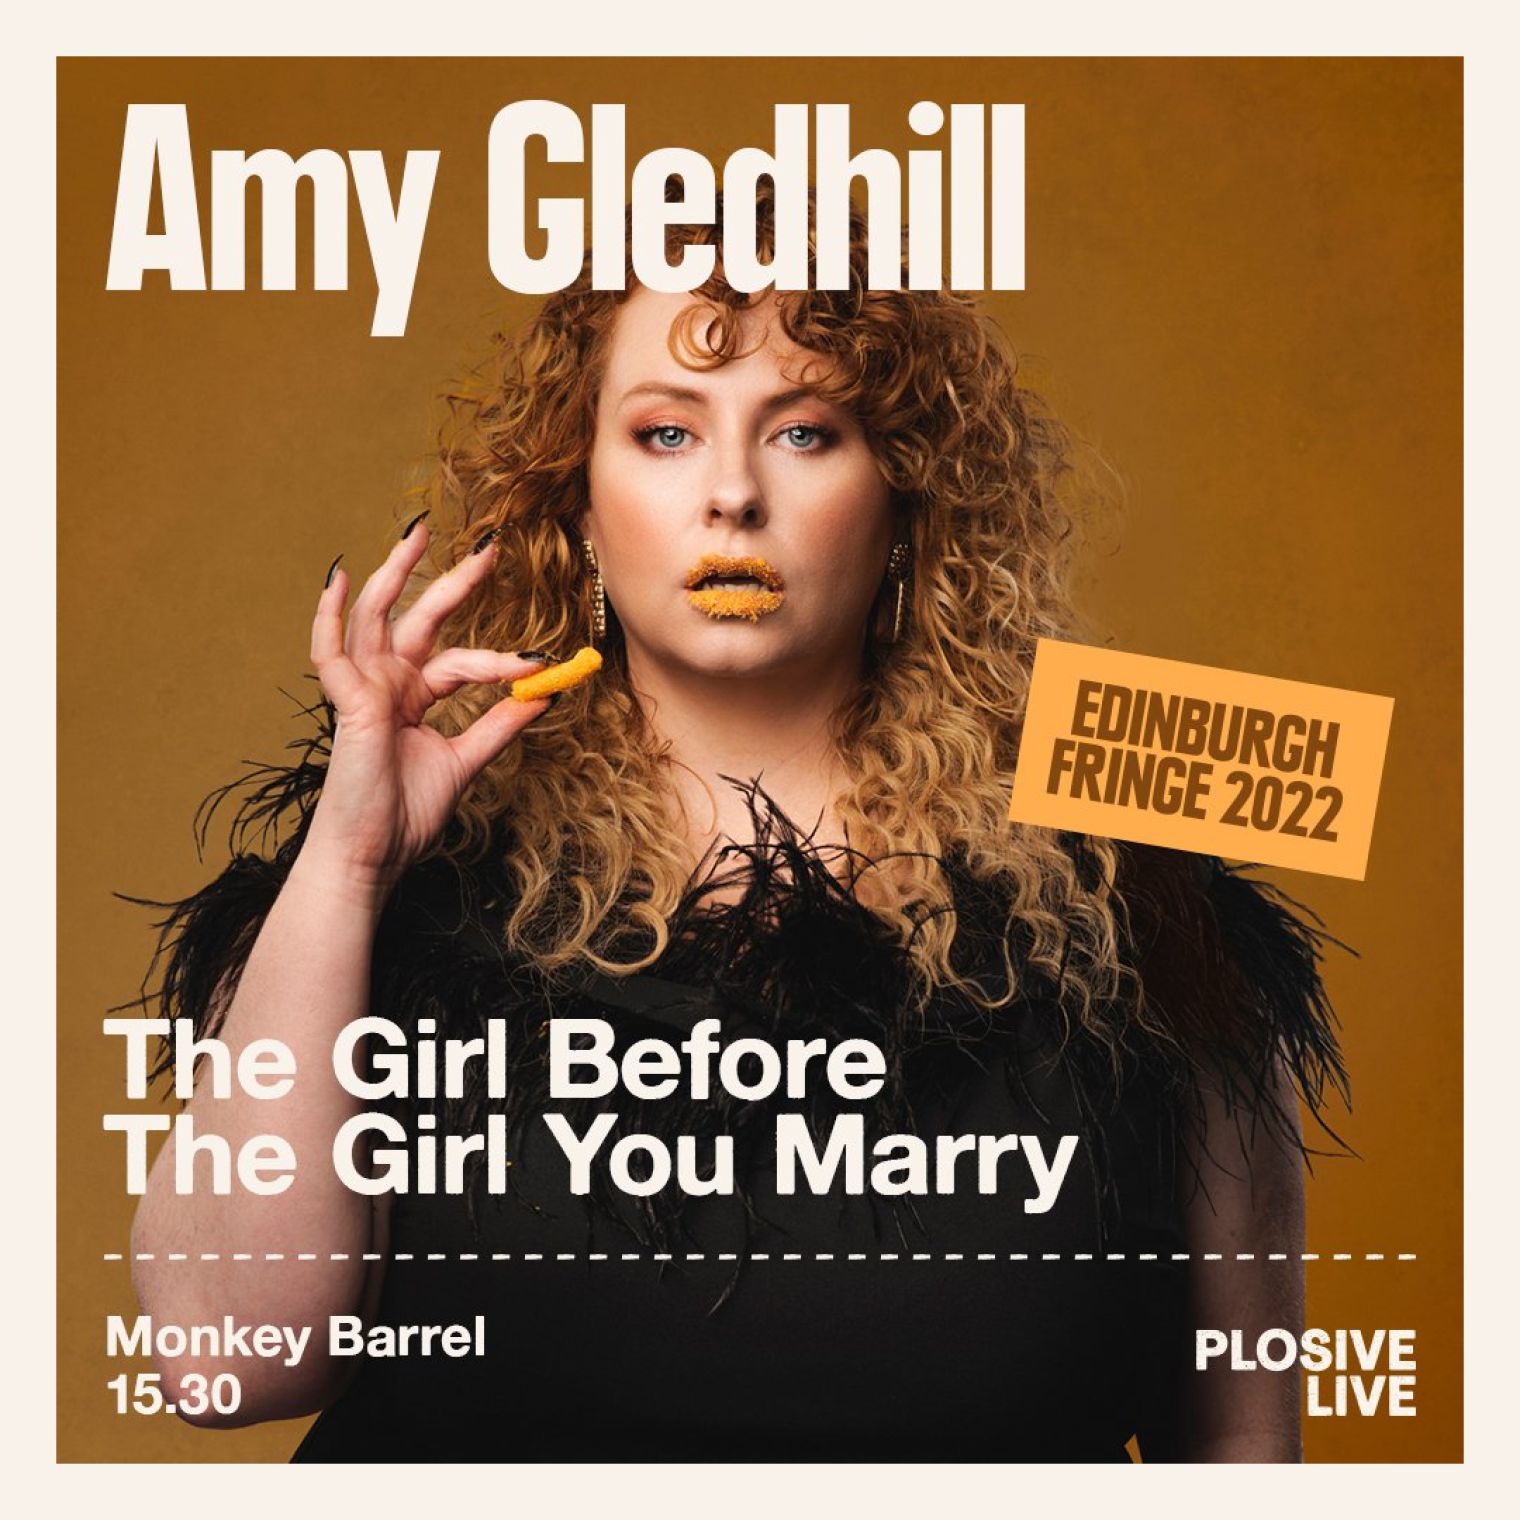 Amy Gledhill's debut solo Edinburgh show has received rave reviews from critics